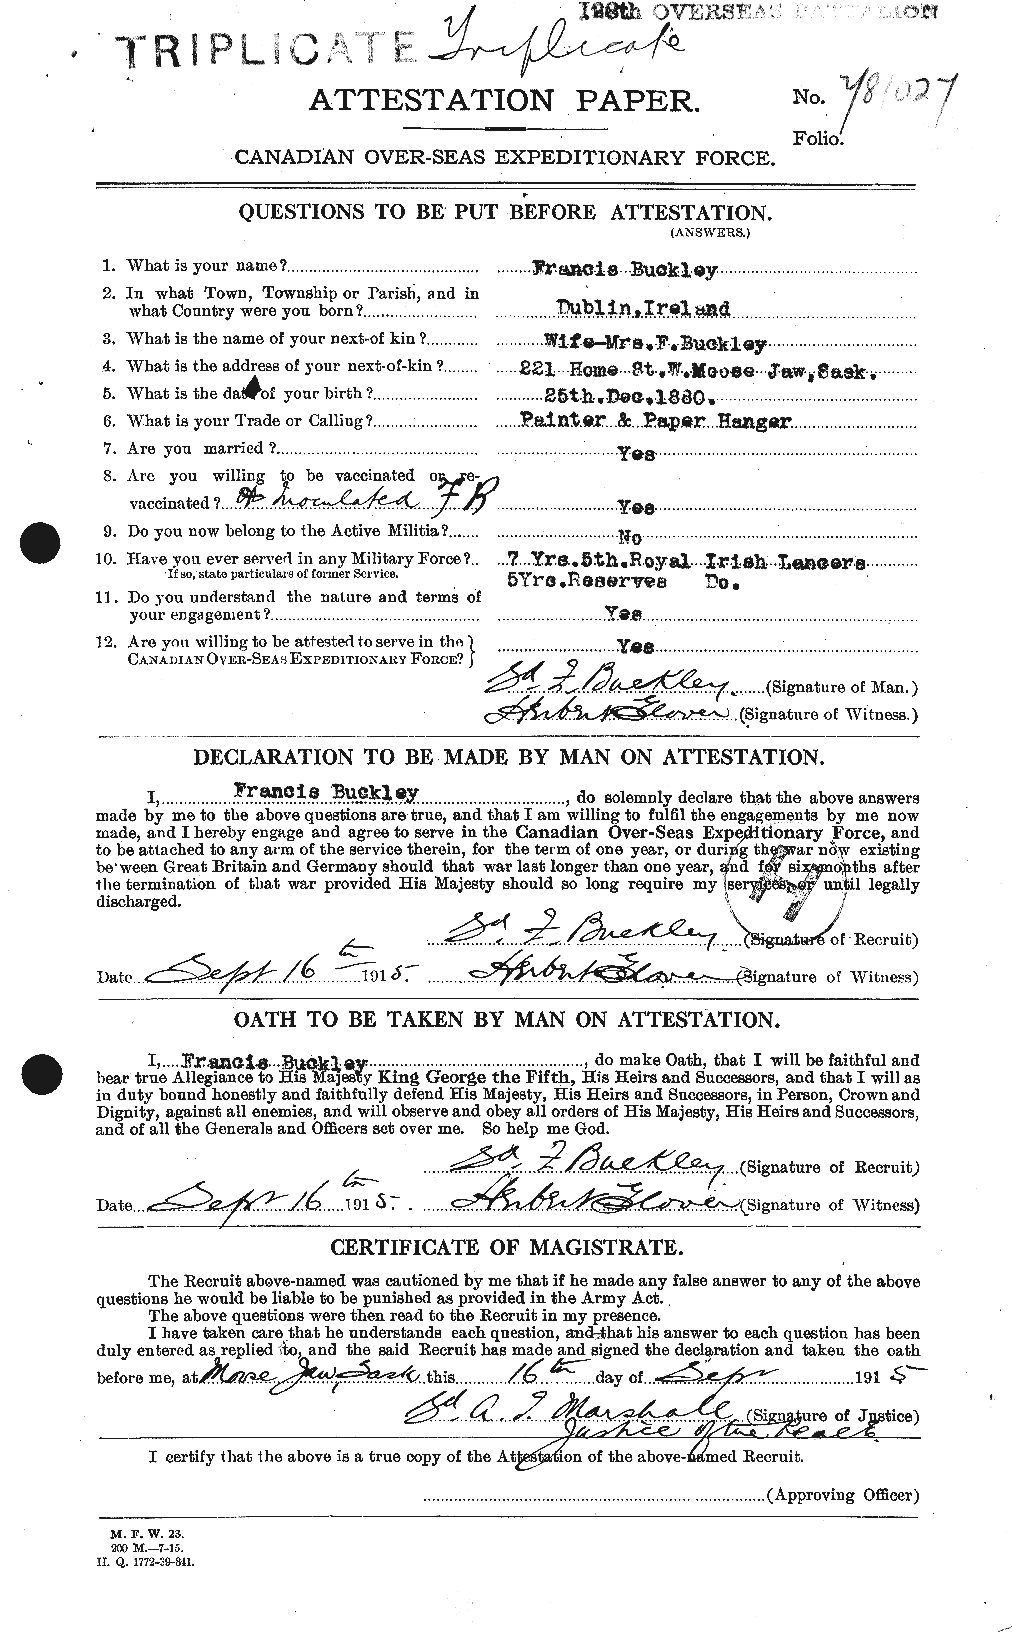 Personnel Records of the First World War - CEF 271081a